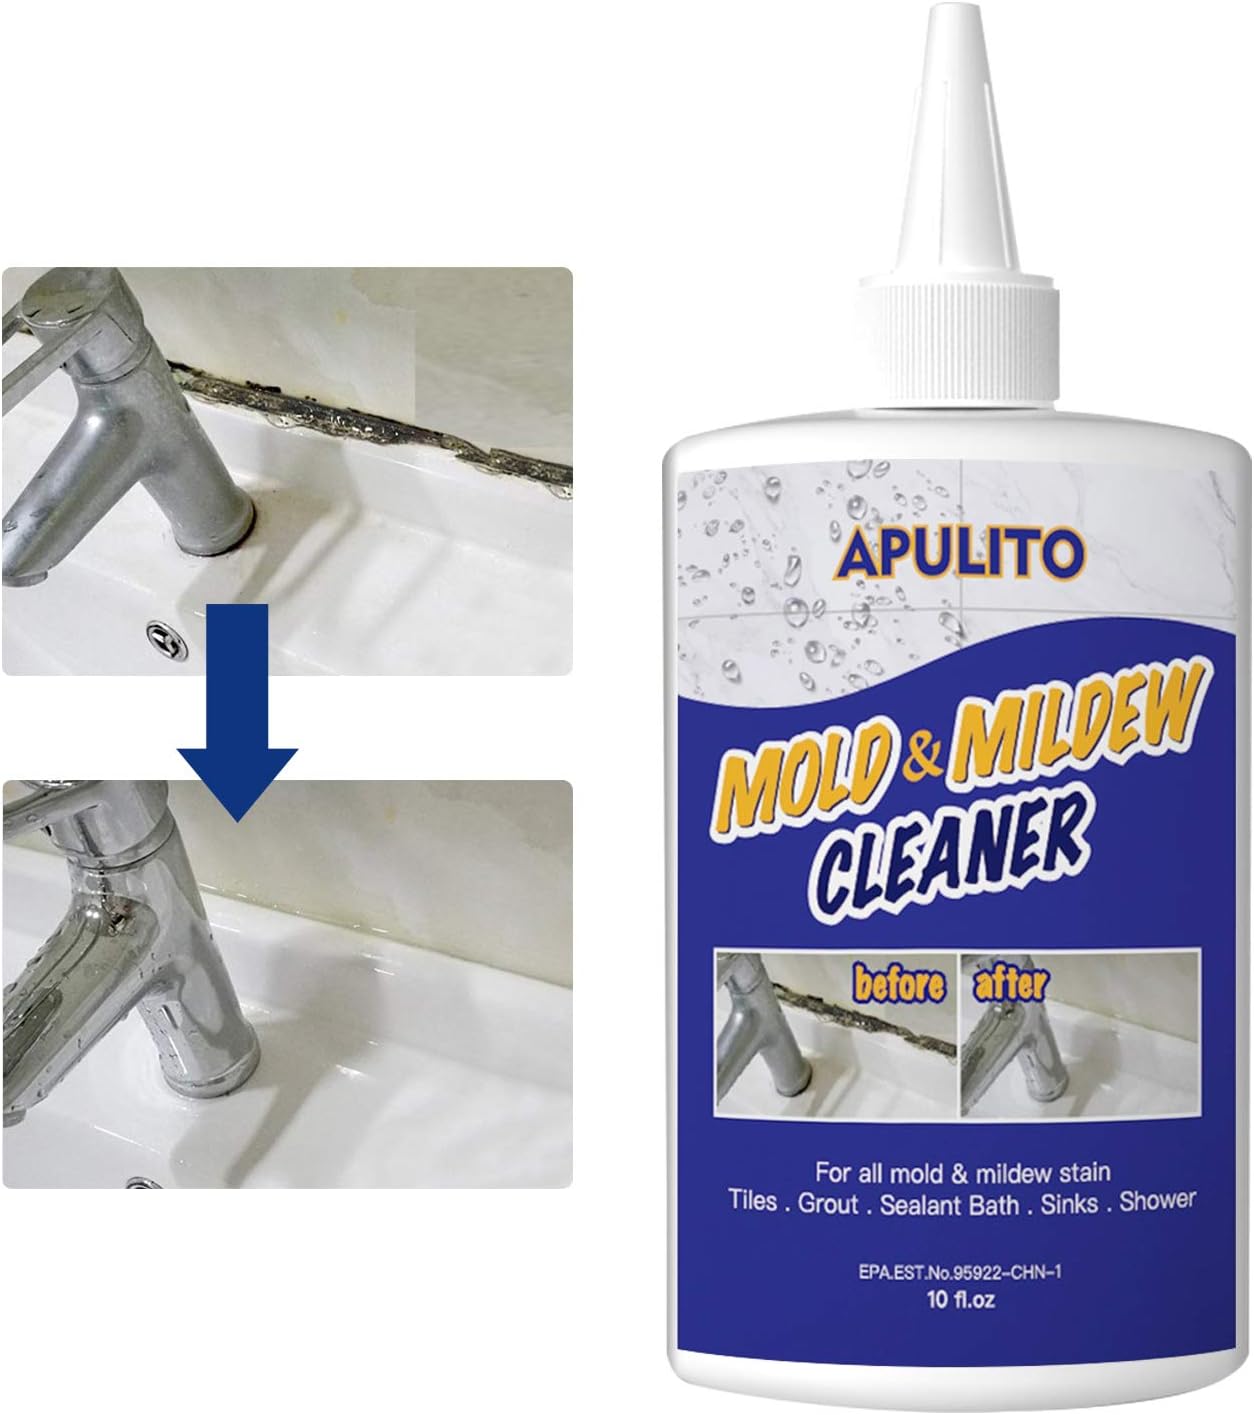 This product works. We used it on our shower and it removed mold from the grout. The mold started disappearing probably within 30 minutes and tougher stains took a bit longer but I left it on for about 6 hours and washed and tried it off and the grout look great. No scrubbing at all. We are so happy. Thought we might have had to replace the grout but this stuff fixed everything.As far as the pros:It works as described. Give it a shot if you are looking to get rid of mold. I am buying a 2nd bottl